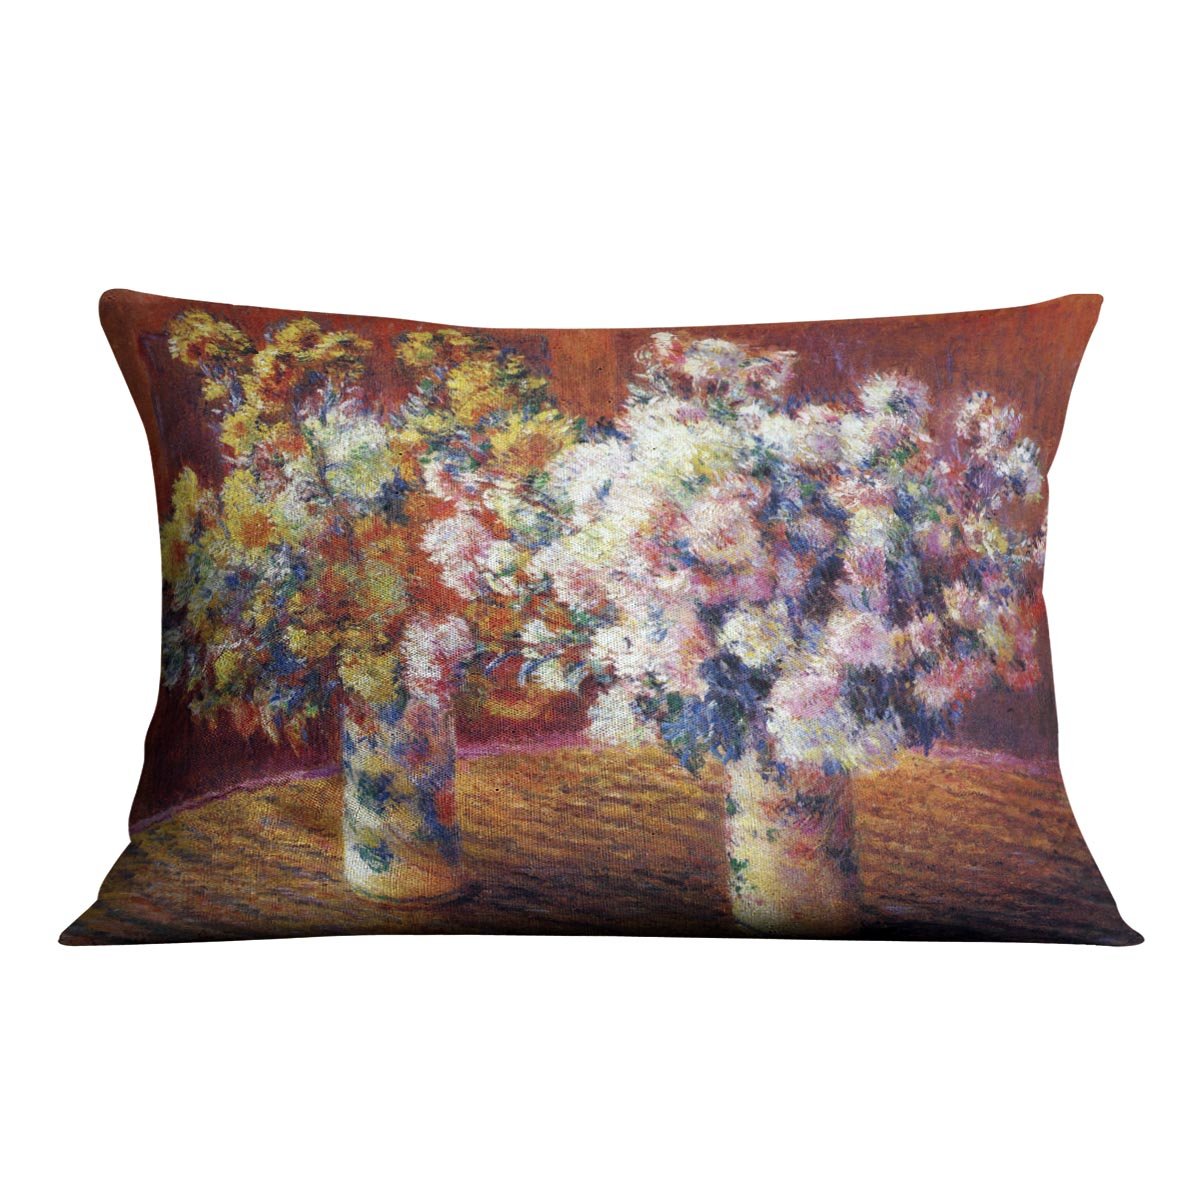 Two vases with Chrysanthemums by Monet Throw Pillow